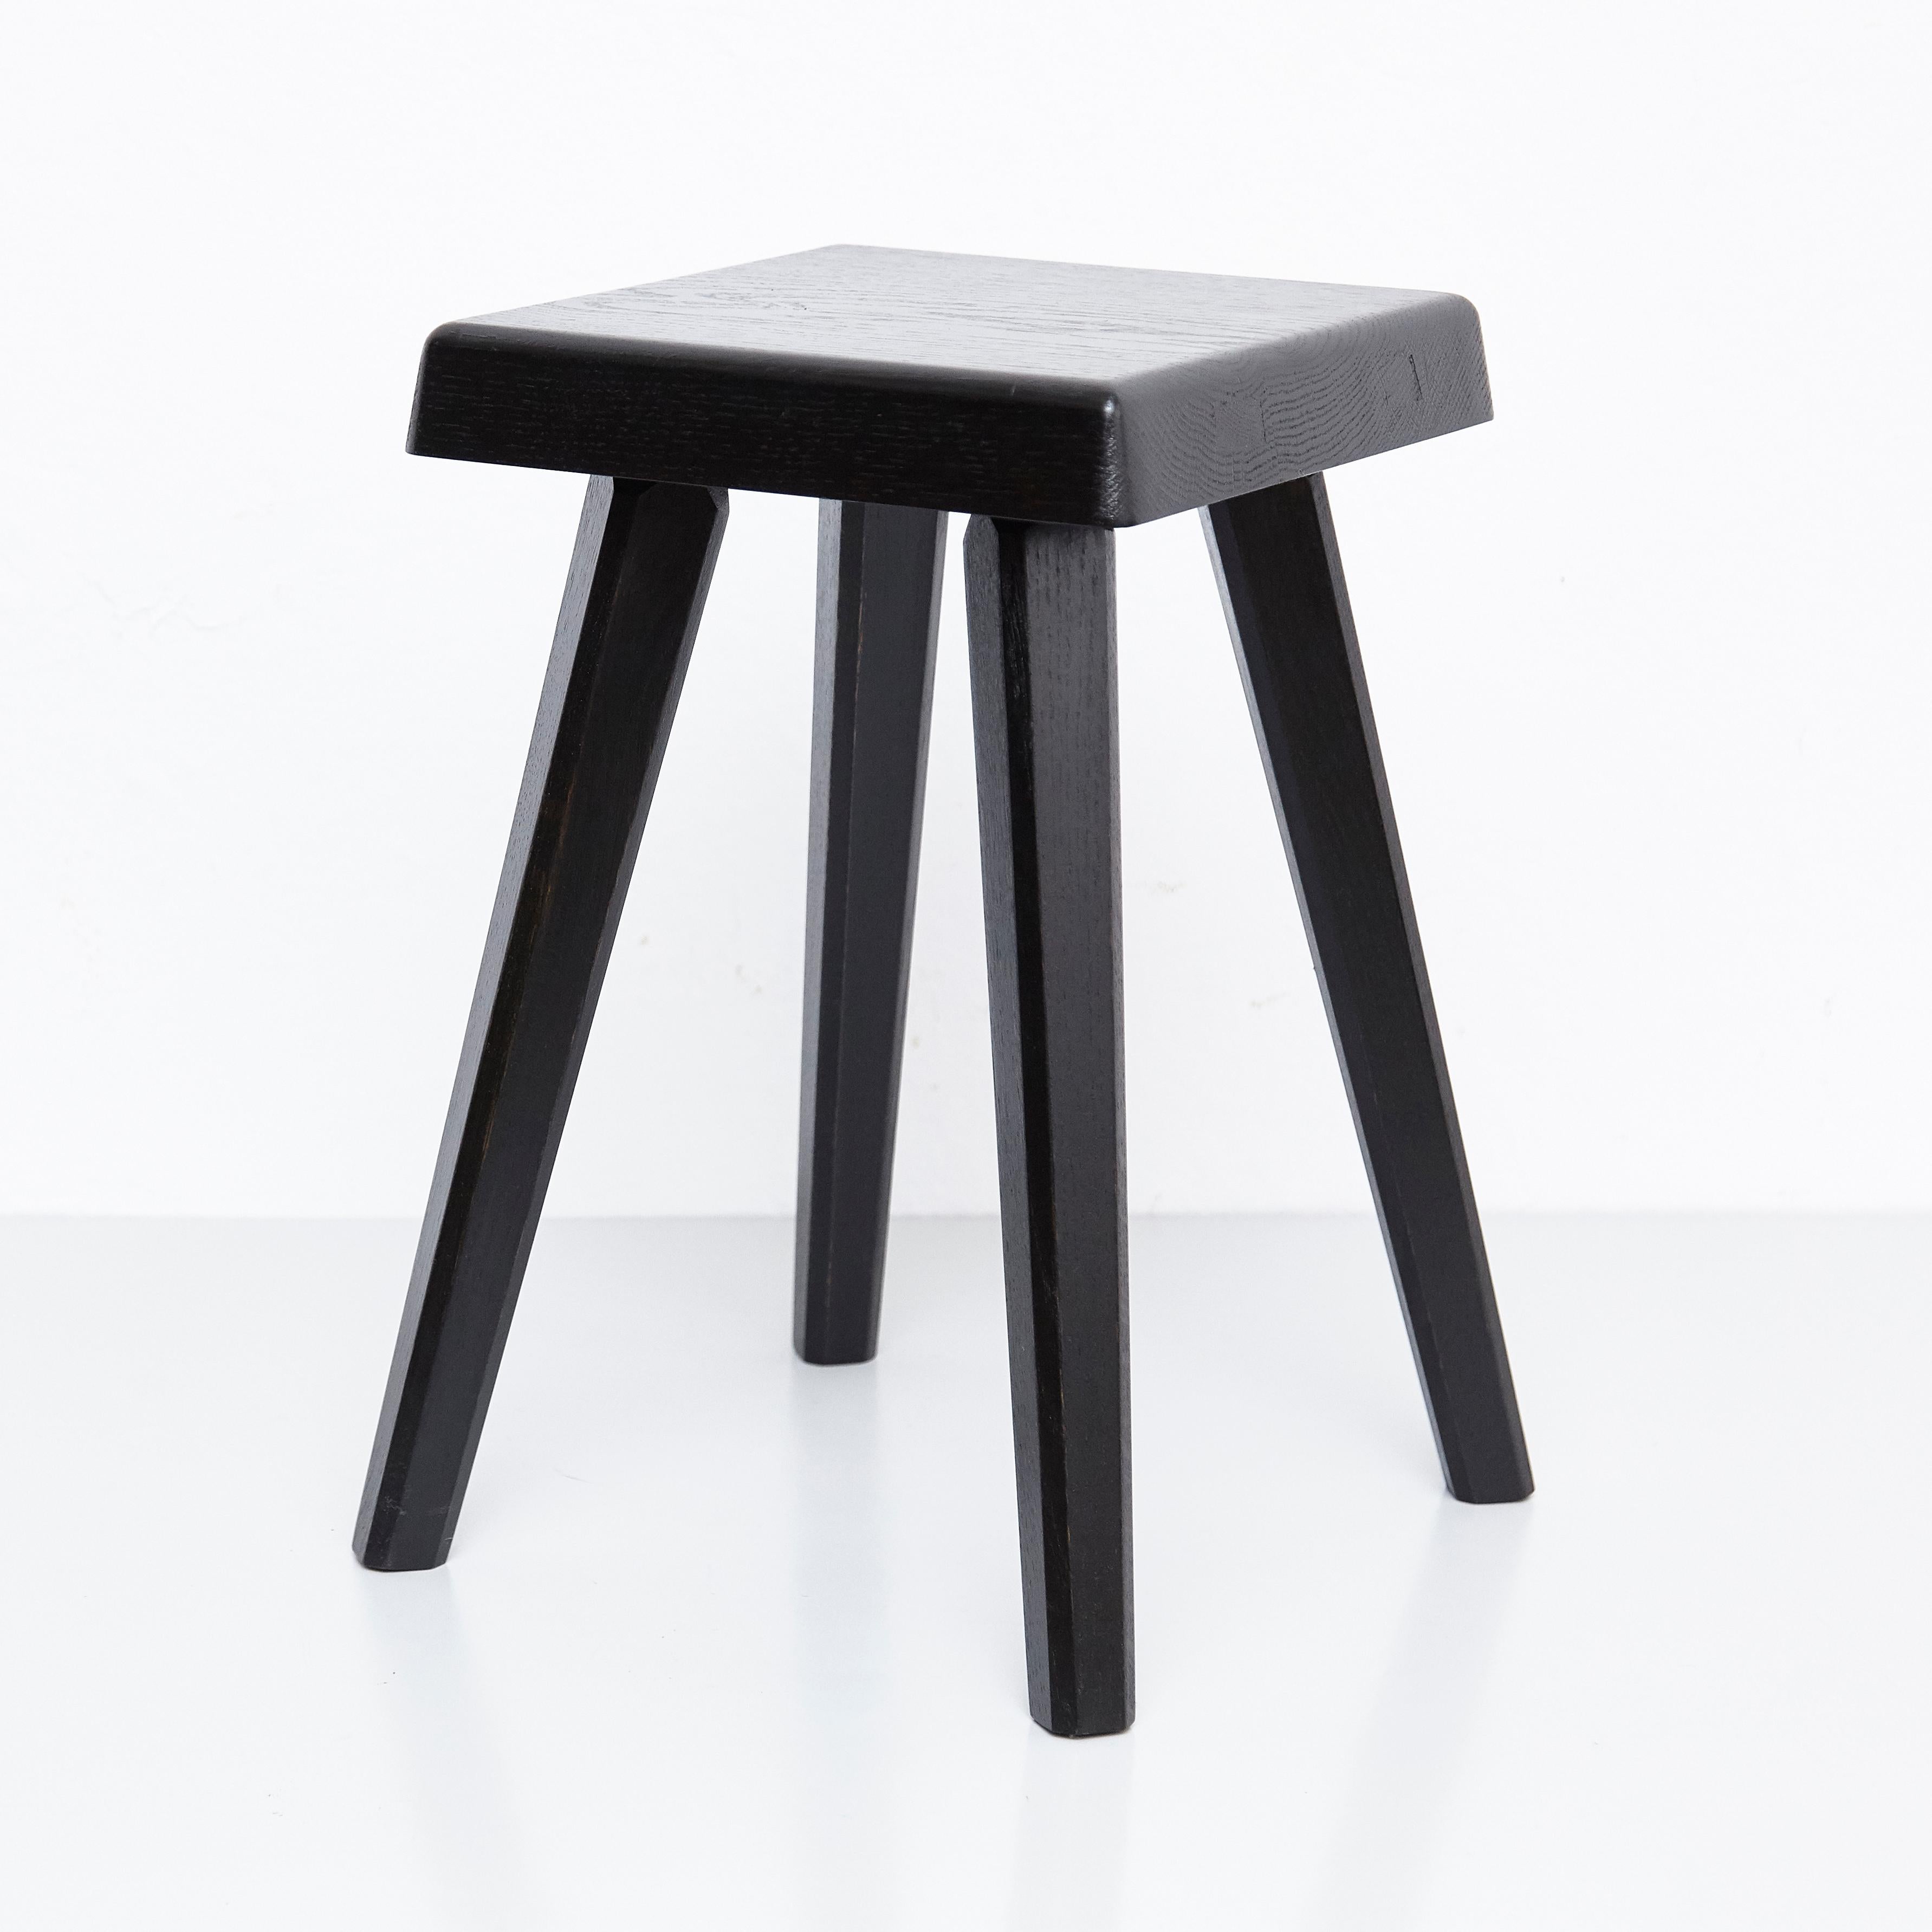 Special Black Edition stools designed by Pierre Chapo, manufactured in France, 1960s.
Manufactured by Chapo creations in 2019

Solid oakwood.

Small : 29 x 29 x 33 cm
Tall : 29 x 29 x 45 cm

In good original condition, with minor wear consistent